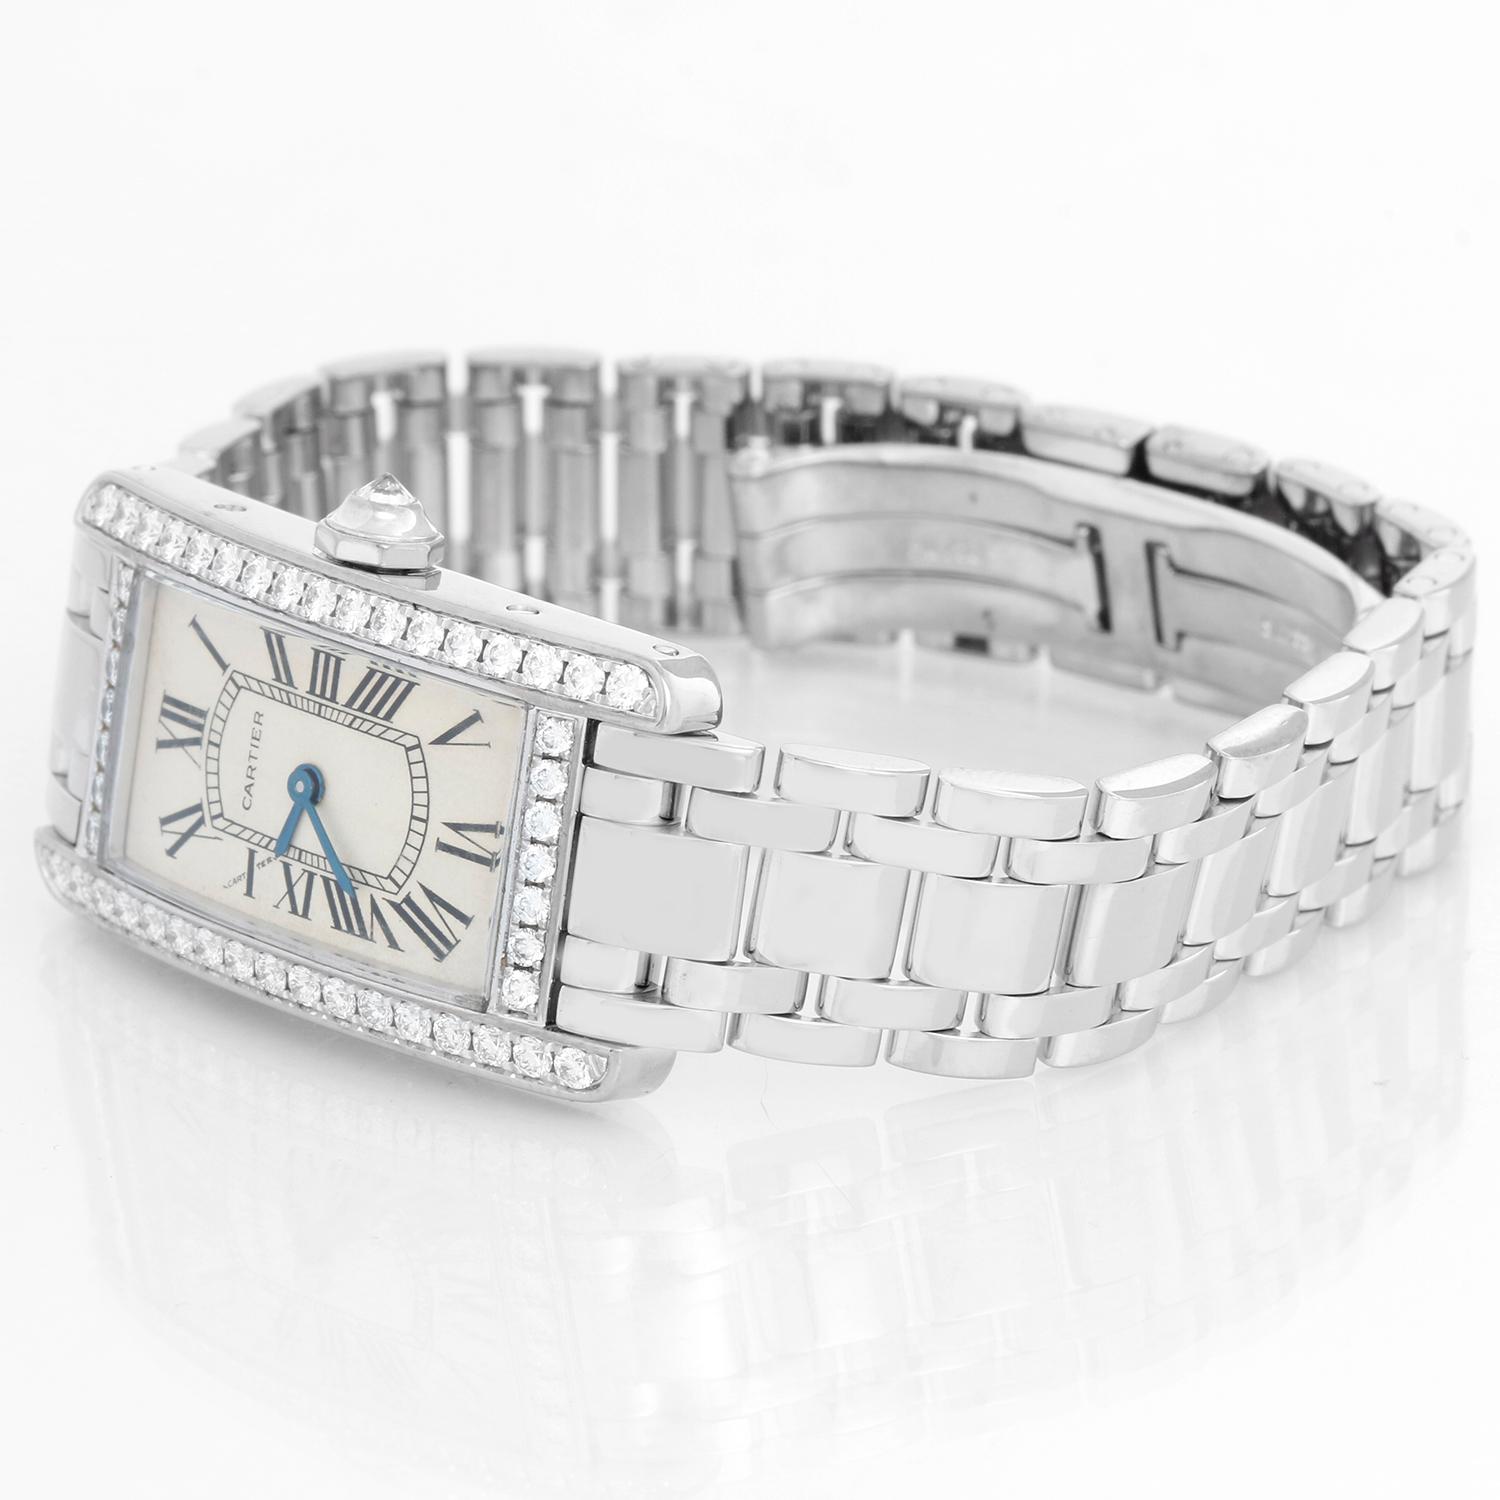 Cartier Tank Americaine (or American) Ladies WG Diamond Watch  2489 - Quartz movement. 18k white gold case with factory diamond bezel  (19 mm x 35 mm ). Silver colored Dial with black Roman numerals. 18k white gold Cartier bracelet with deployant